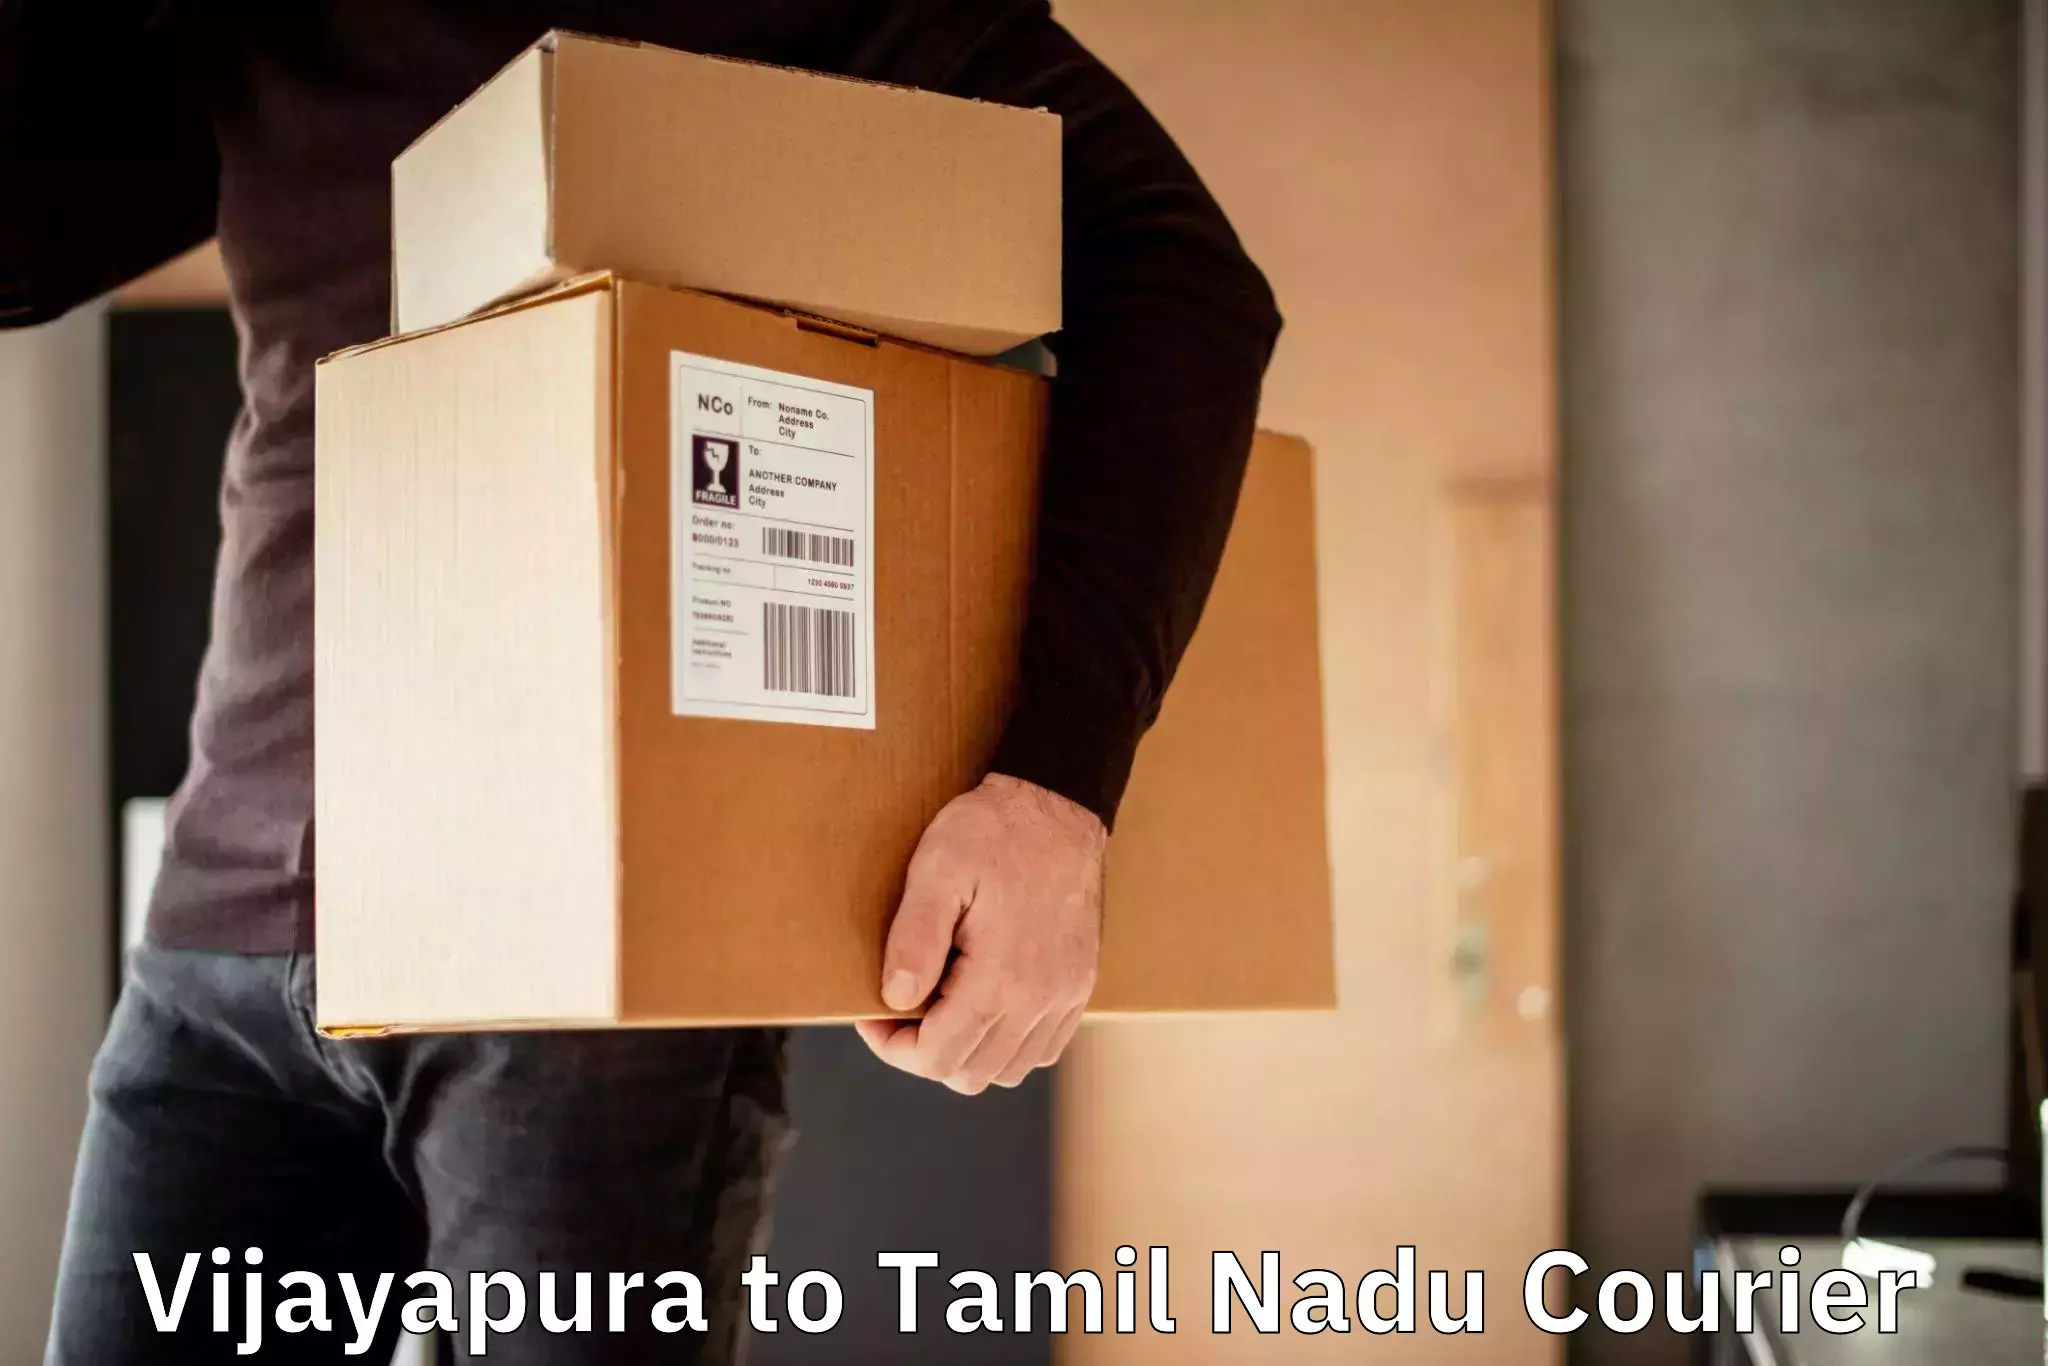 Dynamic courier services Vijayapura to Shanmugha Arts Science Technology and Research Academy Thanjavur